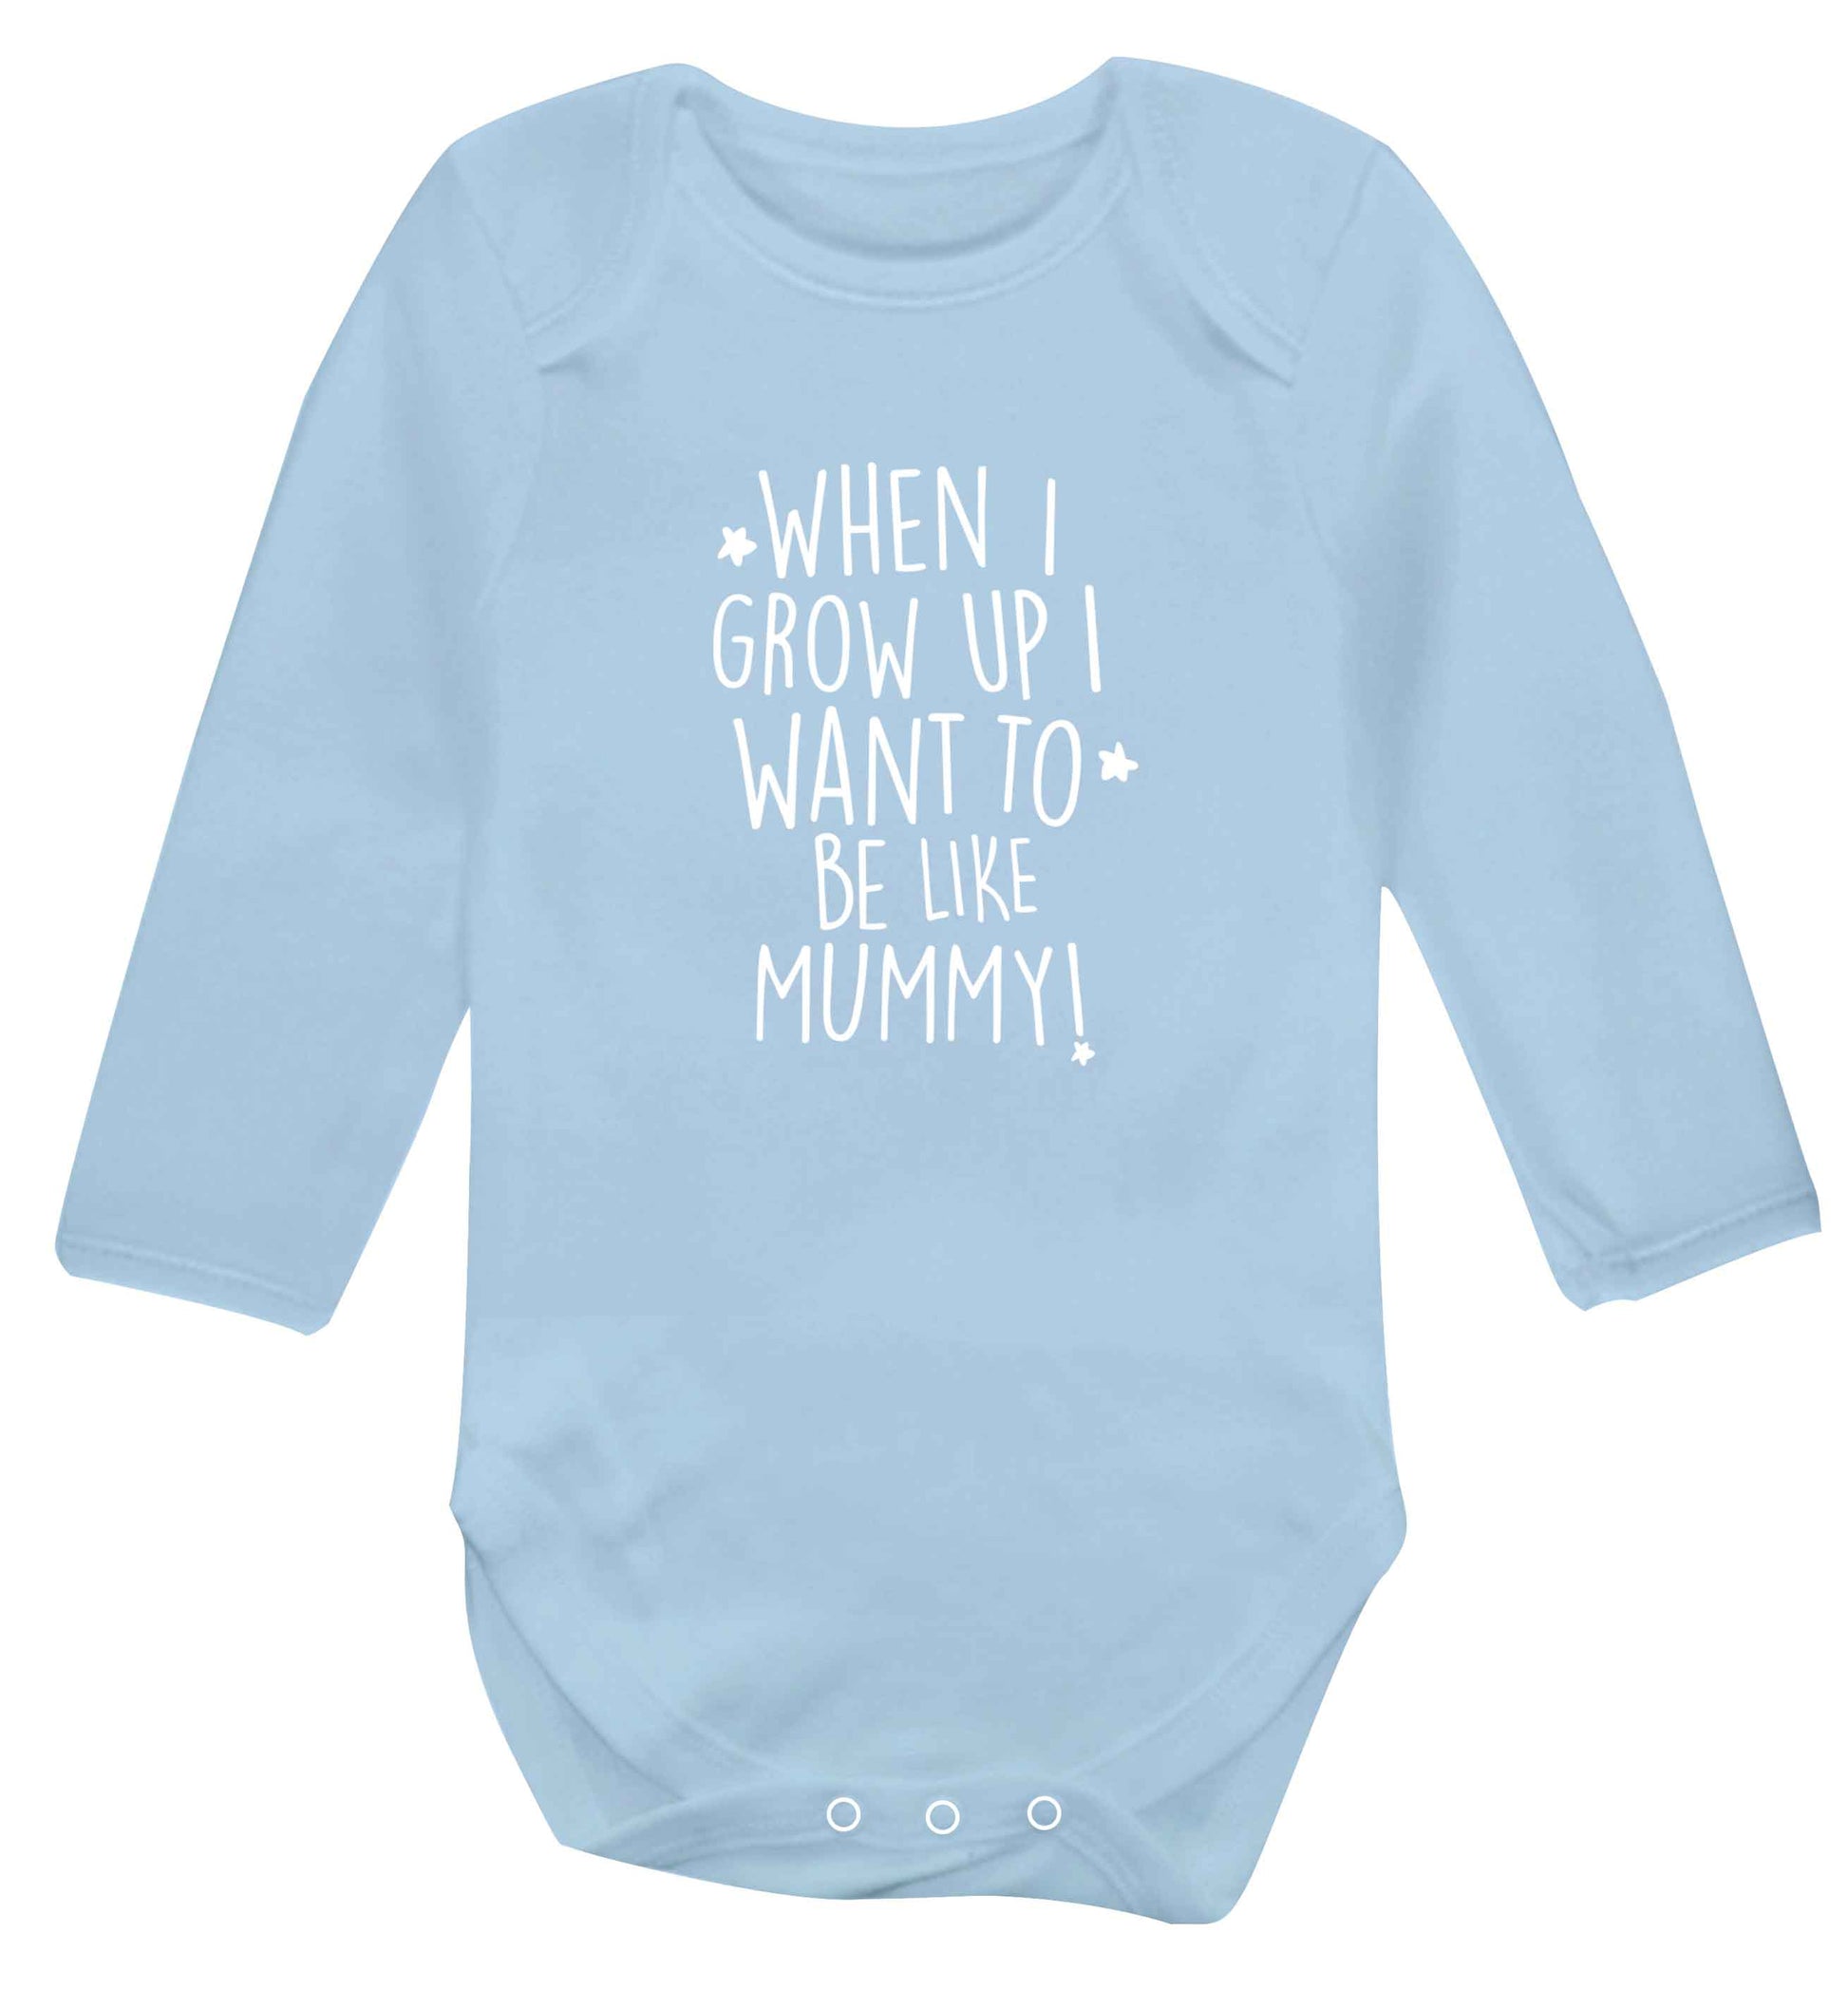 When I grow up I want to be like my mummy baby vest long sleeved pale blue 6-12 months